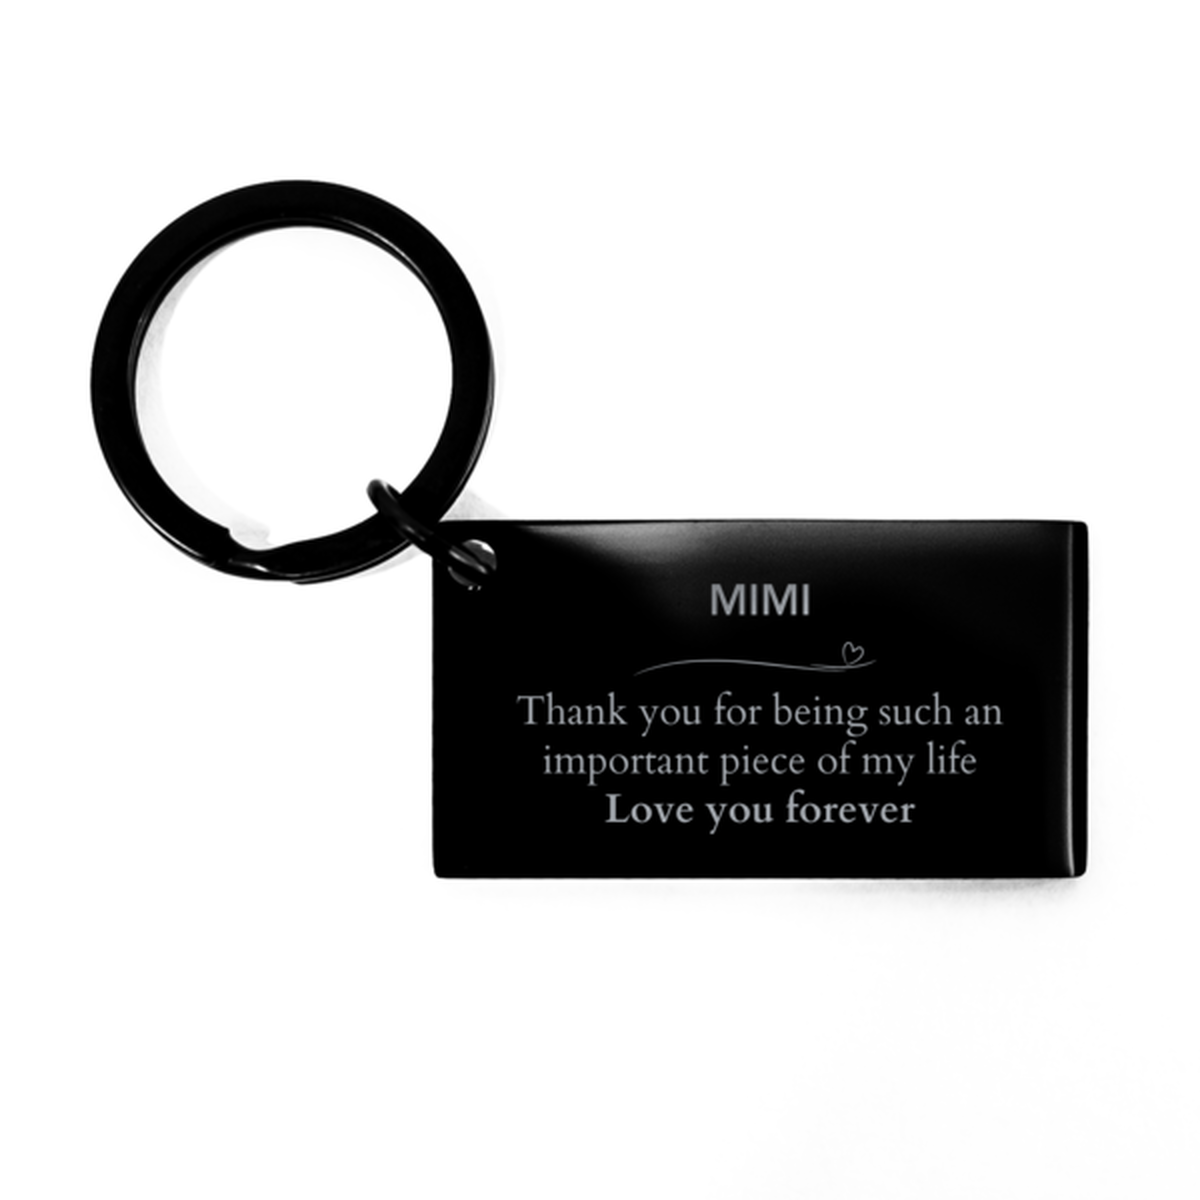 Appropriate Mimi Keychain Epic Birthday Gifts for Mimi Thank you for being such an important piece of my life Mimi Christmas Mothers Fathers Day